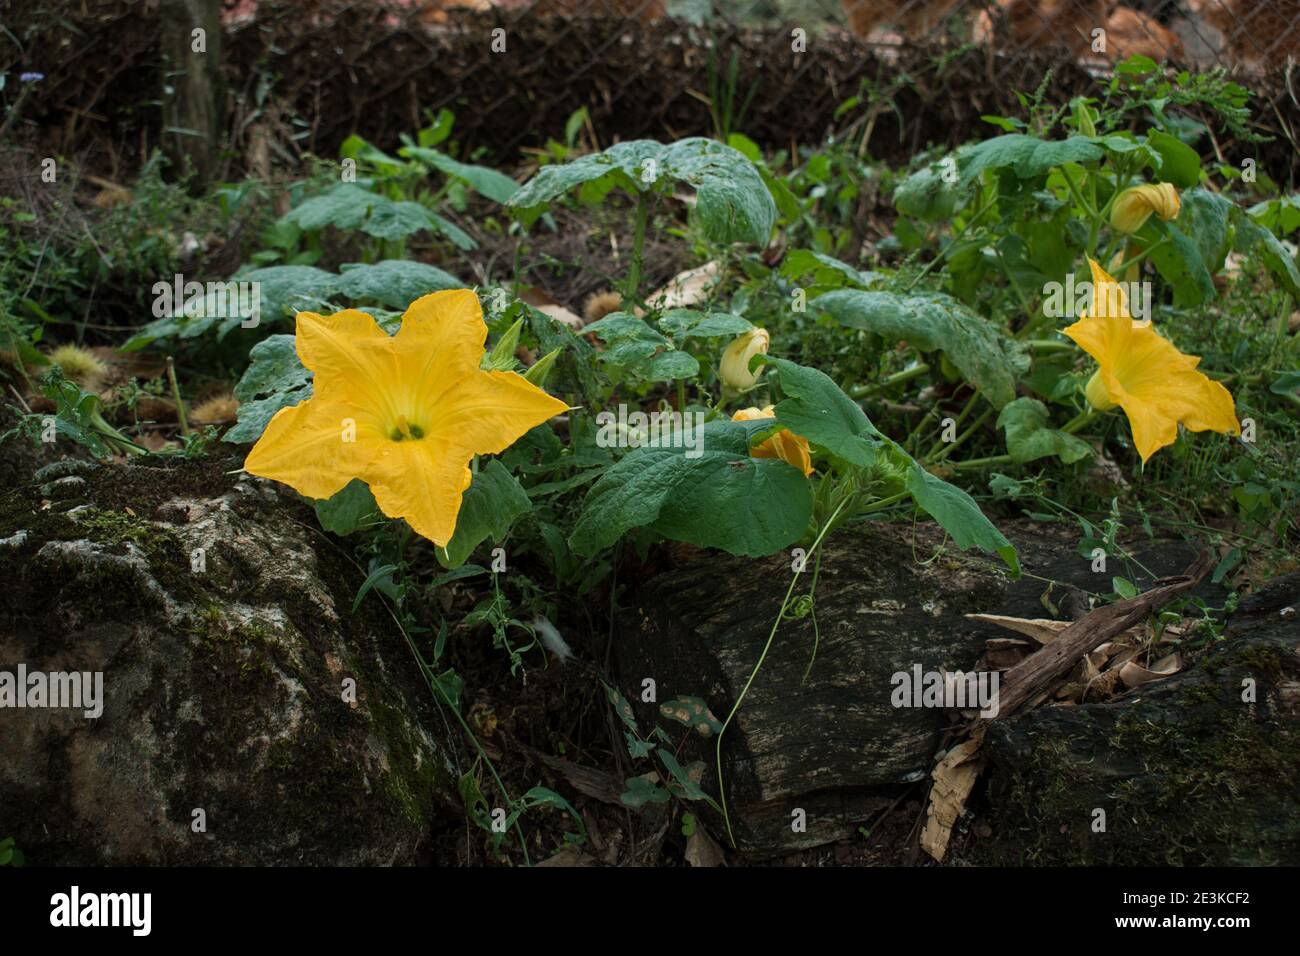 Yellow blossom flower of zucchini in garden.Fried zucchini is a traditional recipe in Greece. Zucchini plant.Green vegetable growing on bush. Stock Photo